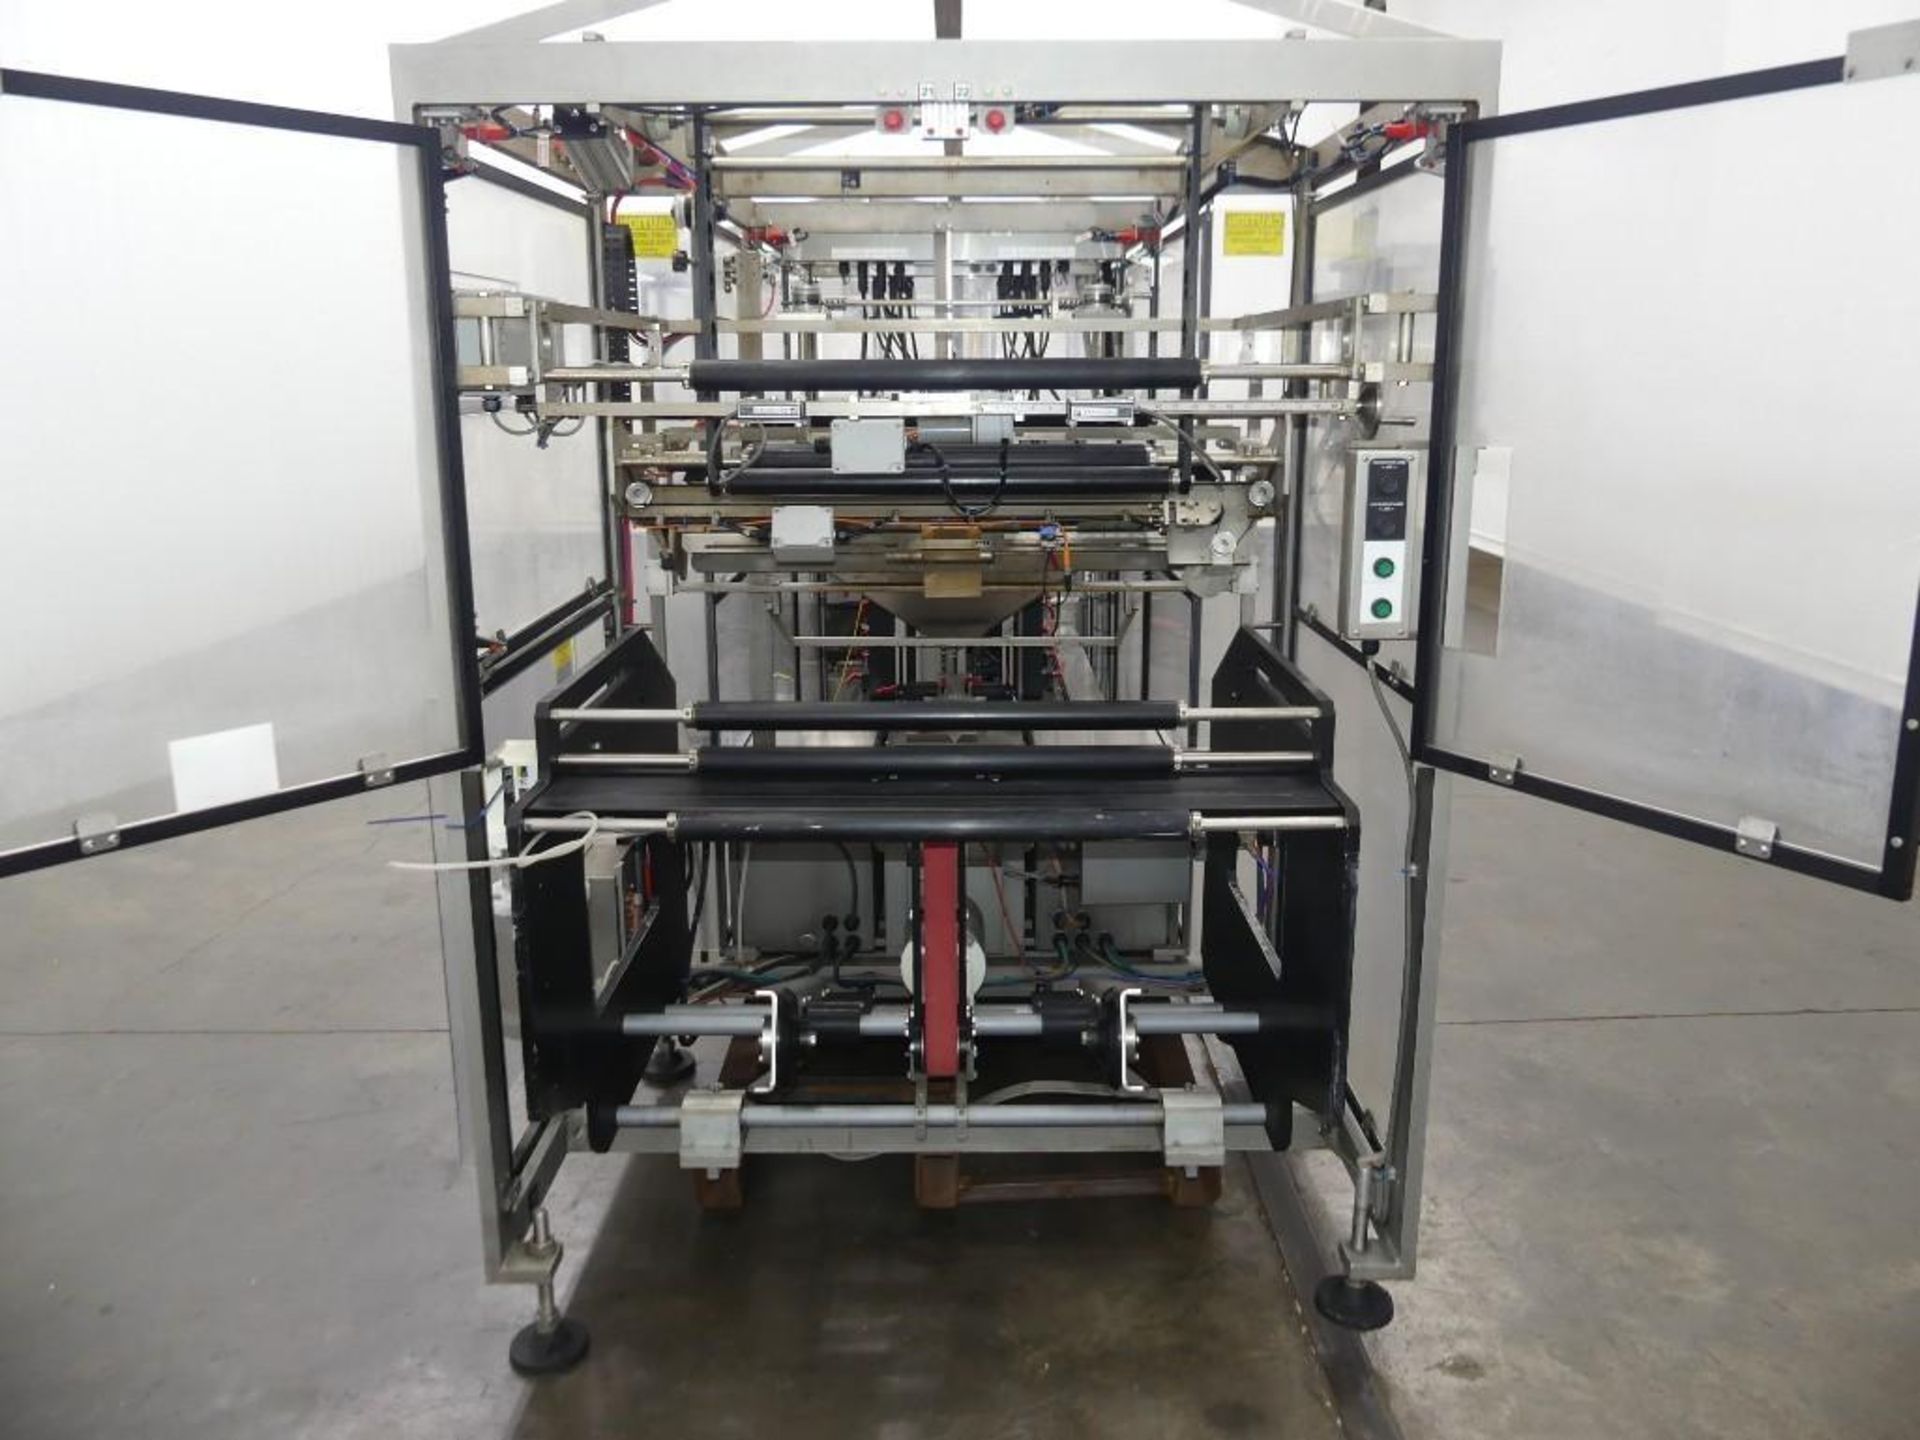 Massman HFFS-IM1000 Flexible Pouch Packaging System - Image 9 of 127